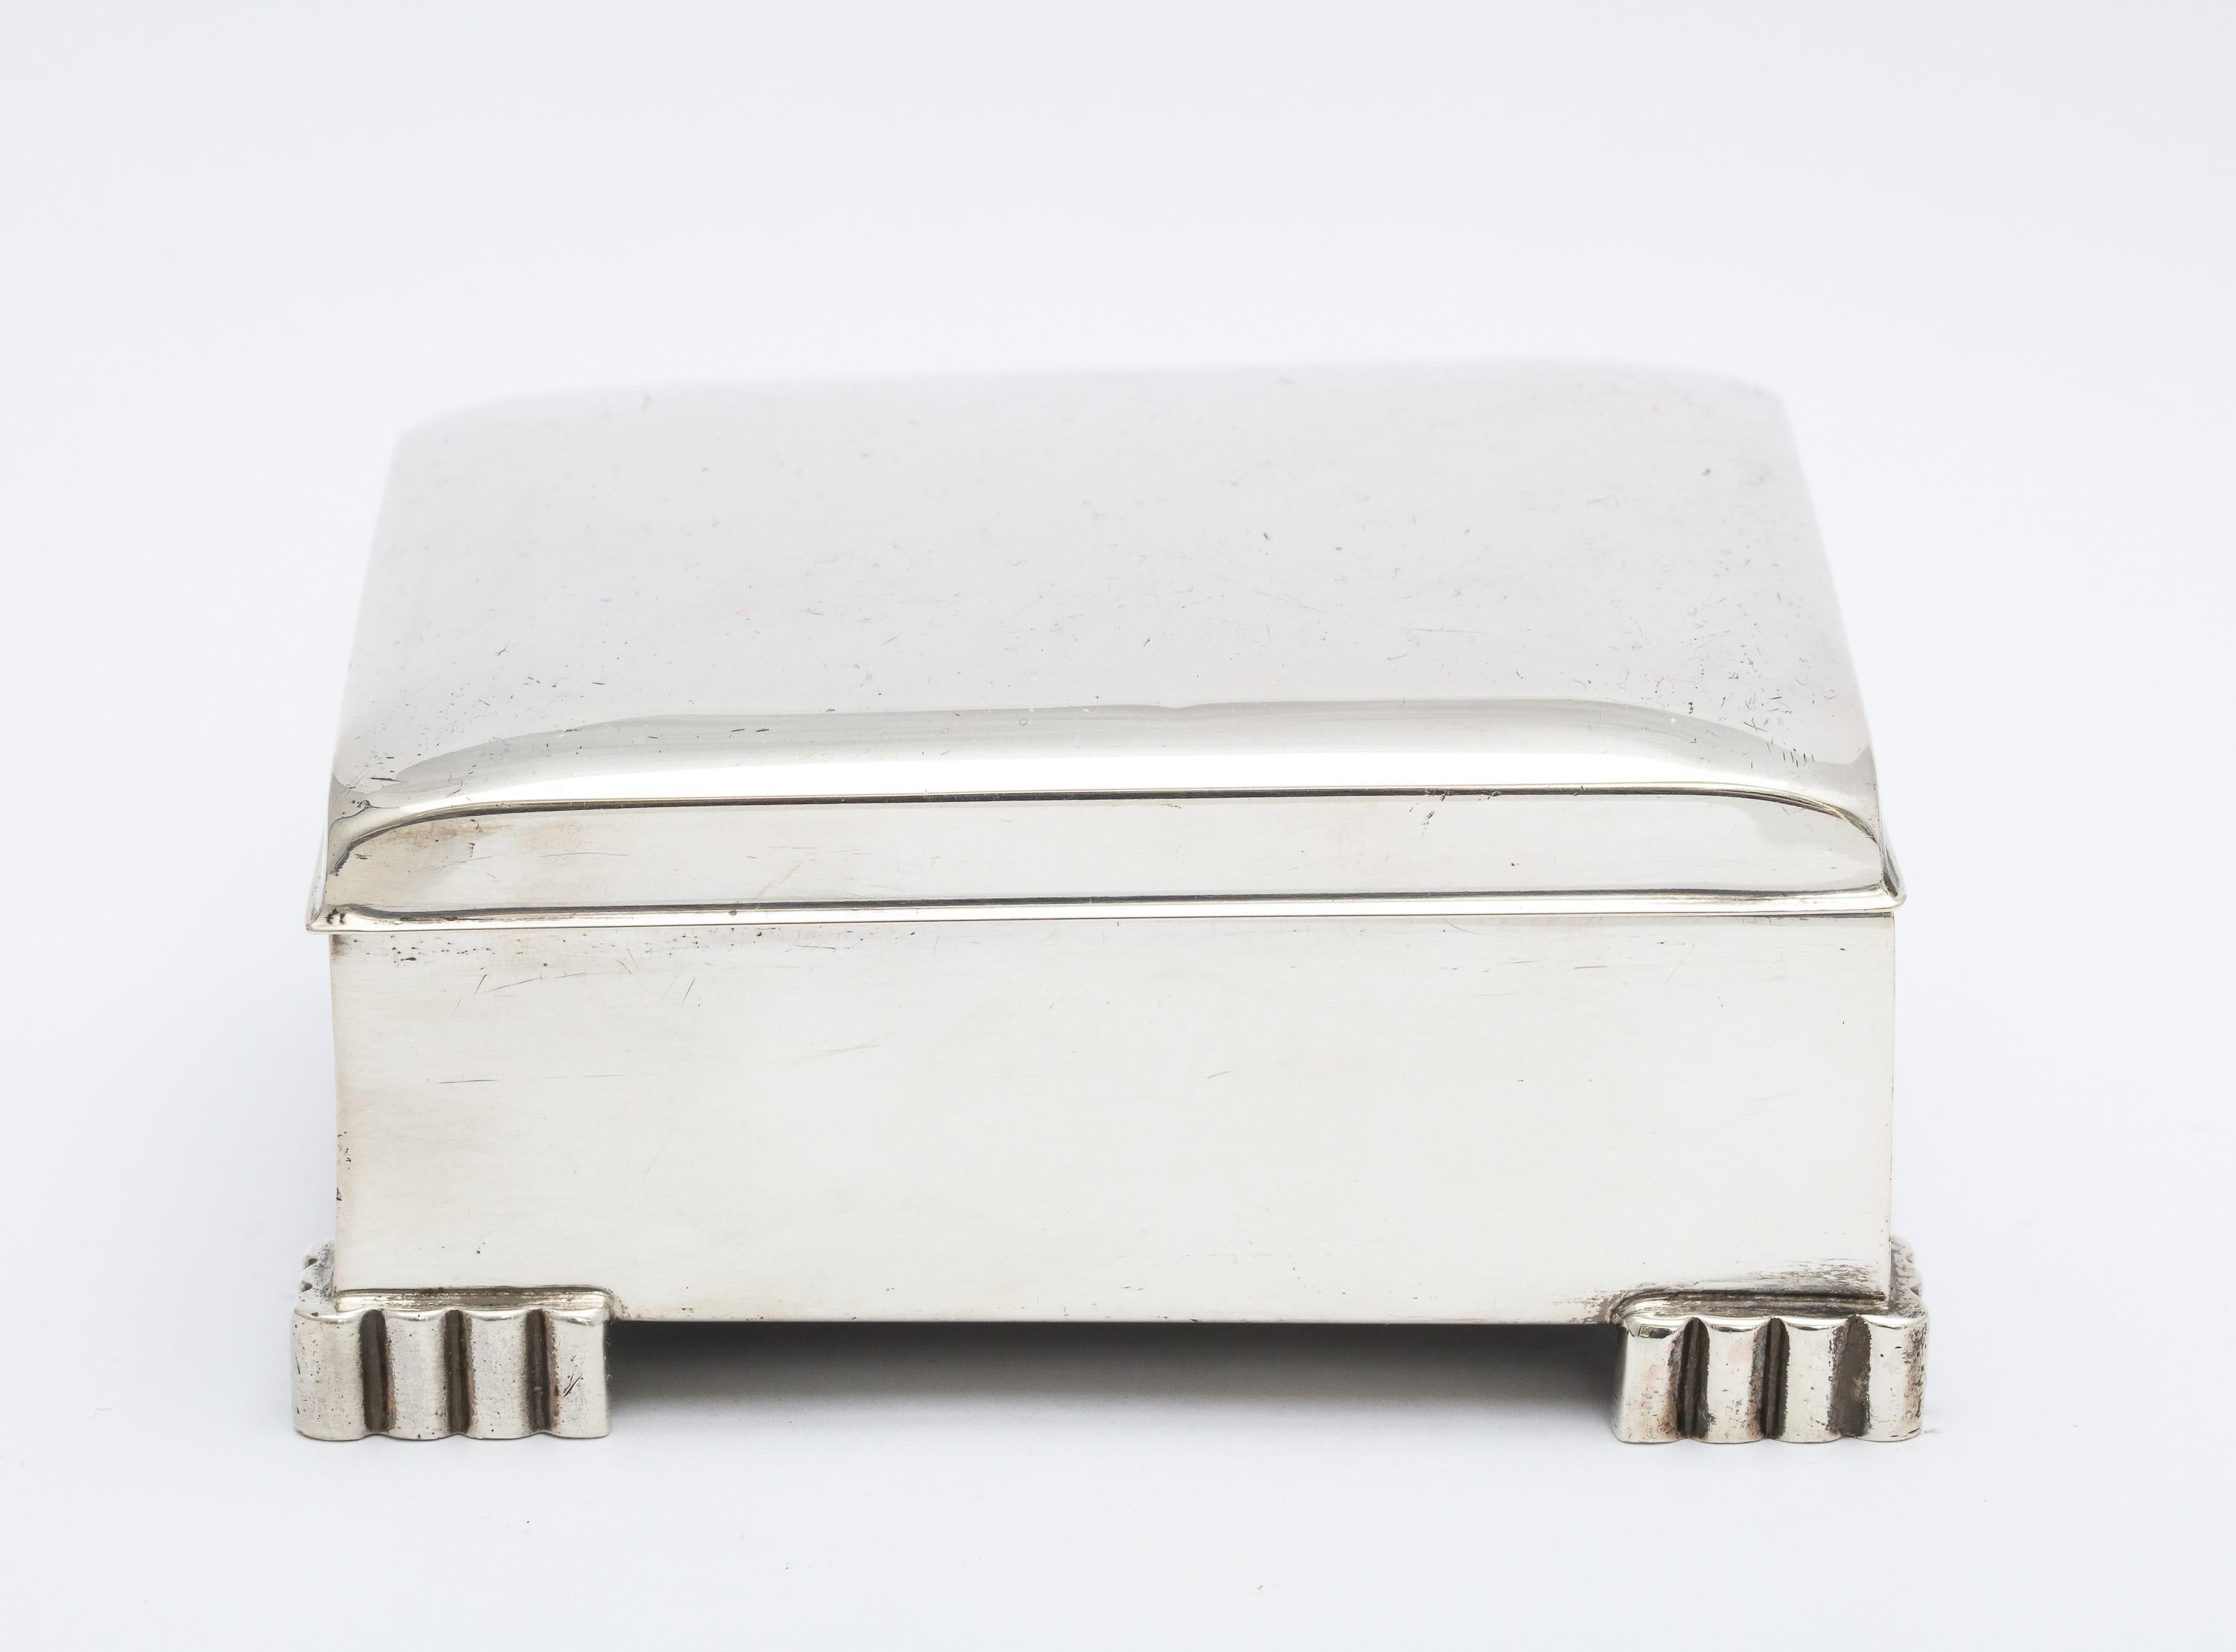 Art Deco, sterling silver table box with hinged lid. Poole Silver Co., Taunton, Mass., circa 1930s. Measures 4 inches wide (from foot to foot) x 3 1/2 inches deep (from foot to foot) x 1 1/2 inches high. Wood lined. One very tiny dint in upper right